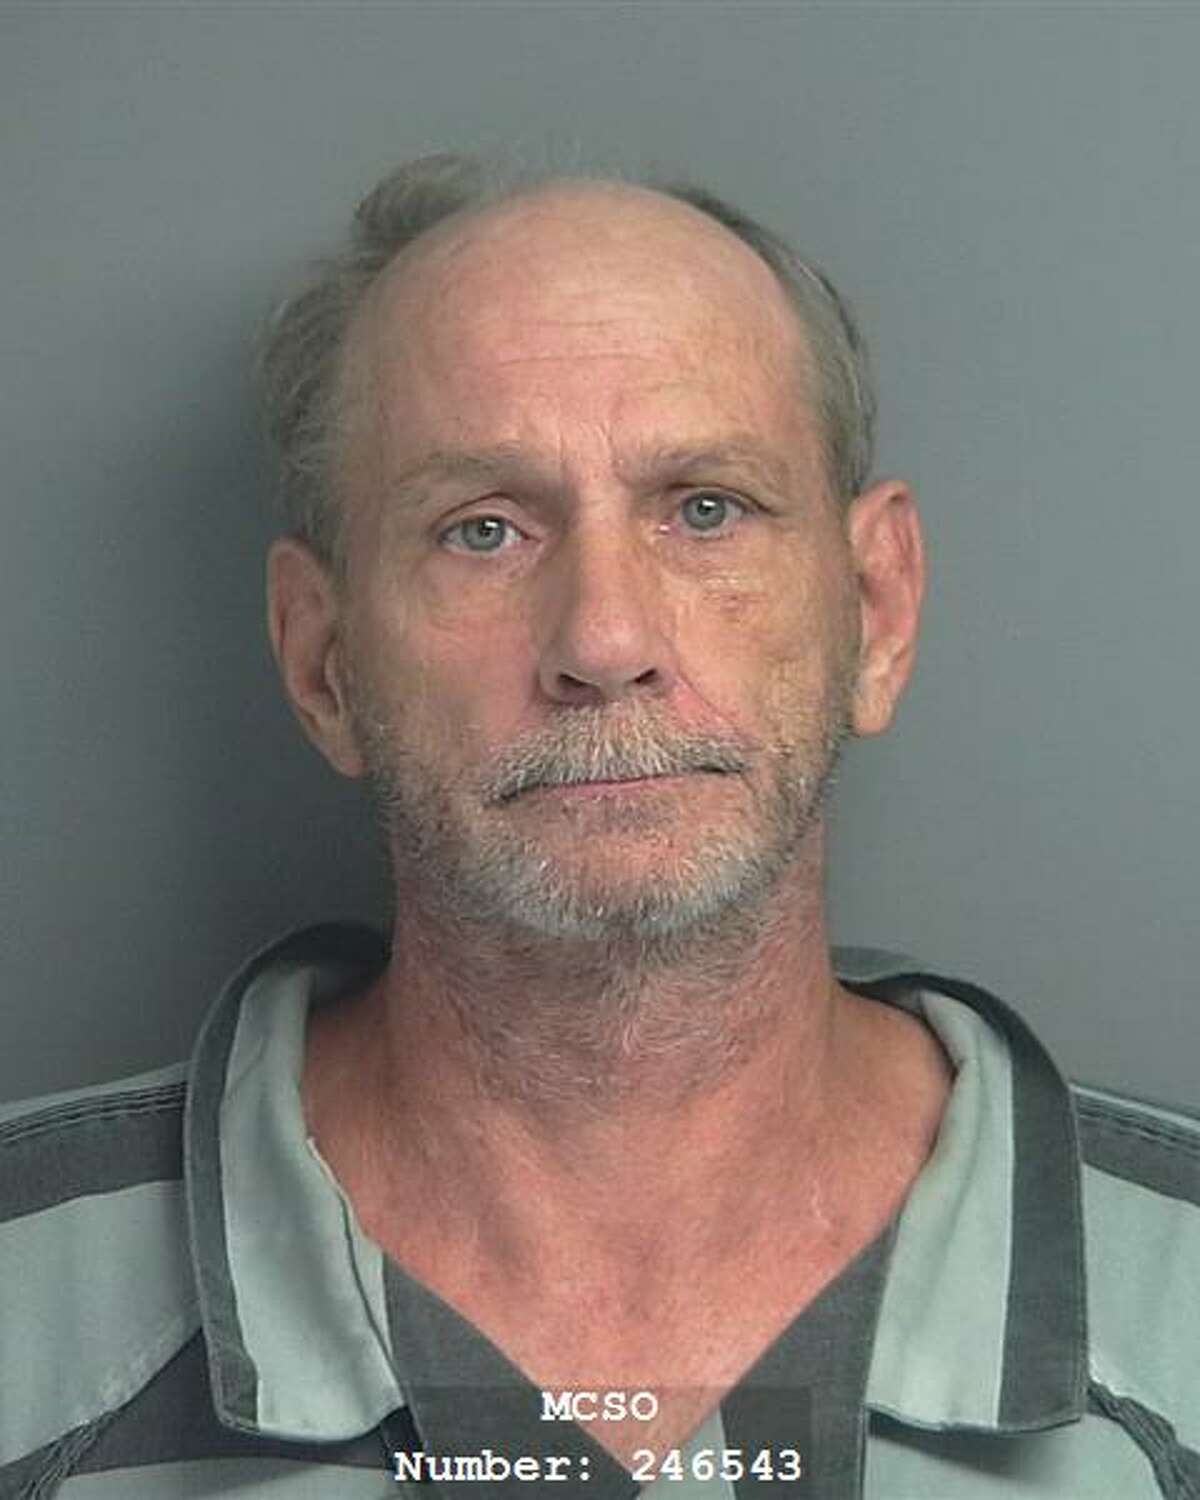 Don Owens Wanted for assault family choking Height: 6 feet, 1 inch Weight: 200 pounds Hazel eyes, brown hair Last known location: New Caney Anyone with information about this person is urged to call Multi-County Crime Stoppers 1-800-392-STOP (7867)